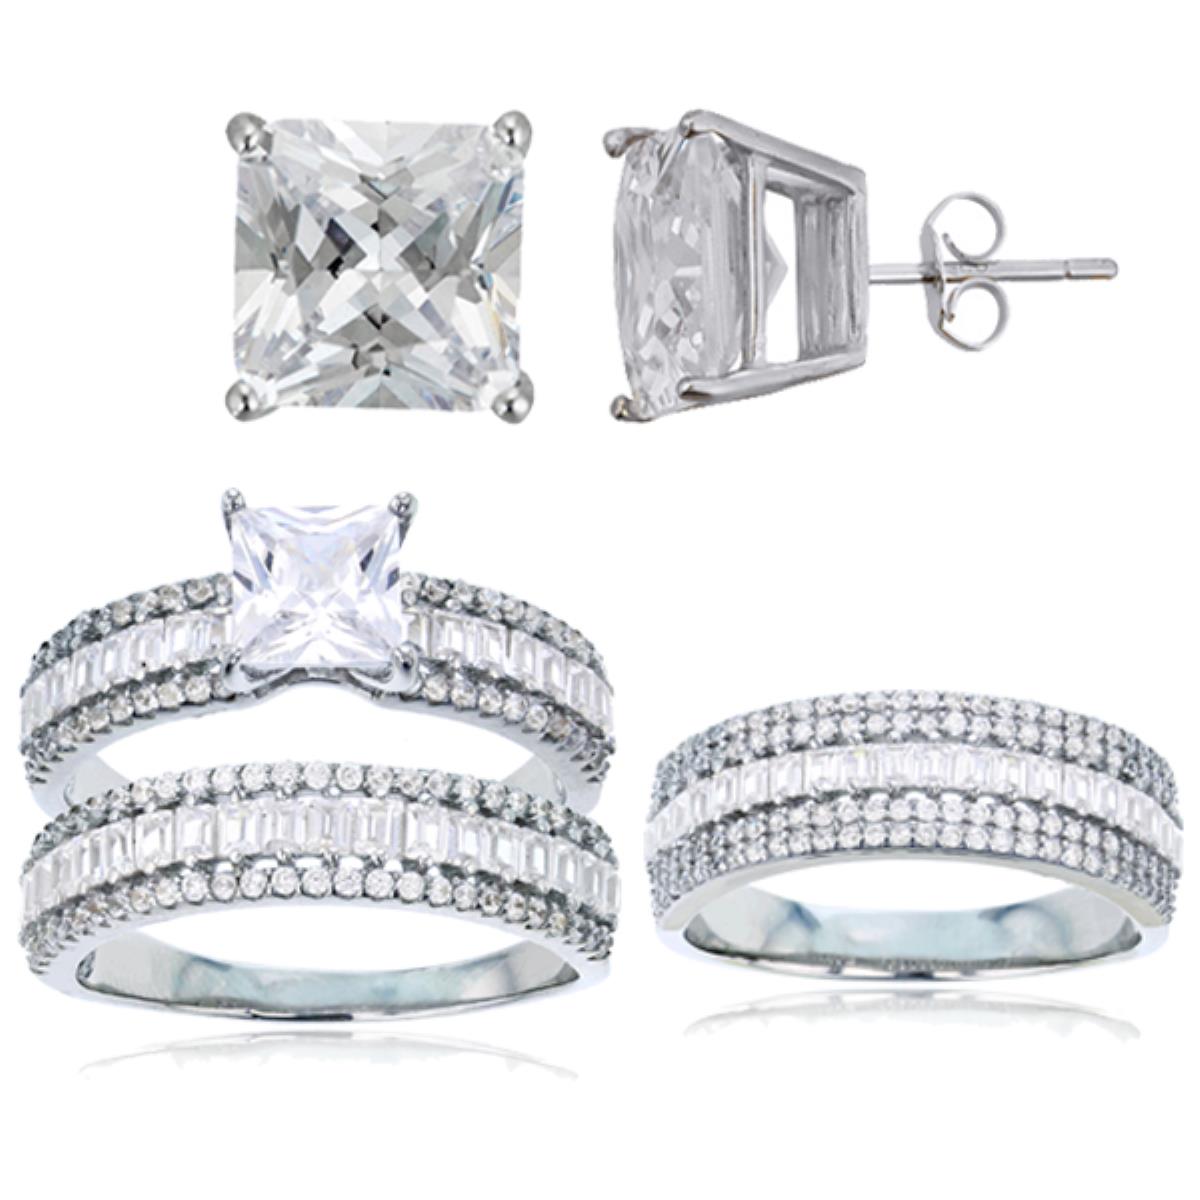 Sterling Silver Rhodium 6mm Sq Cut CZ Bgt Sides Duo Rings, Band & 8mm Sq Solitaire Stud Earring Set